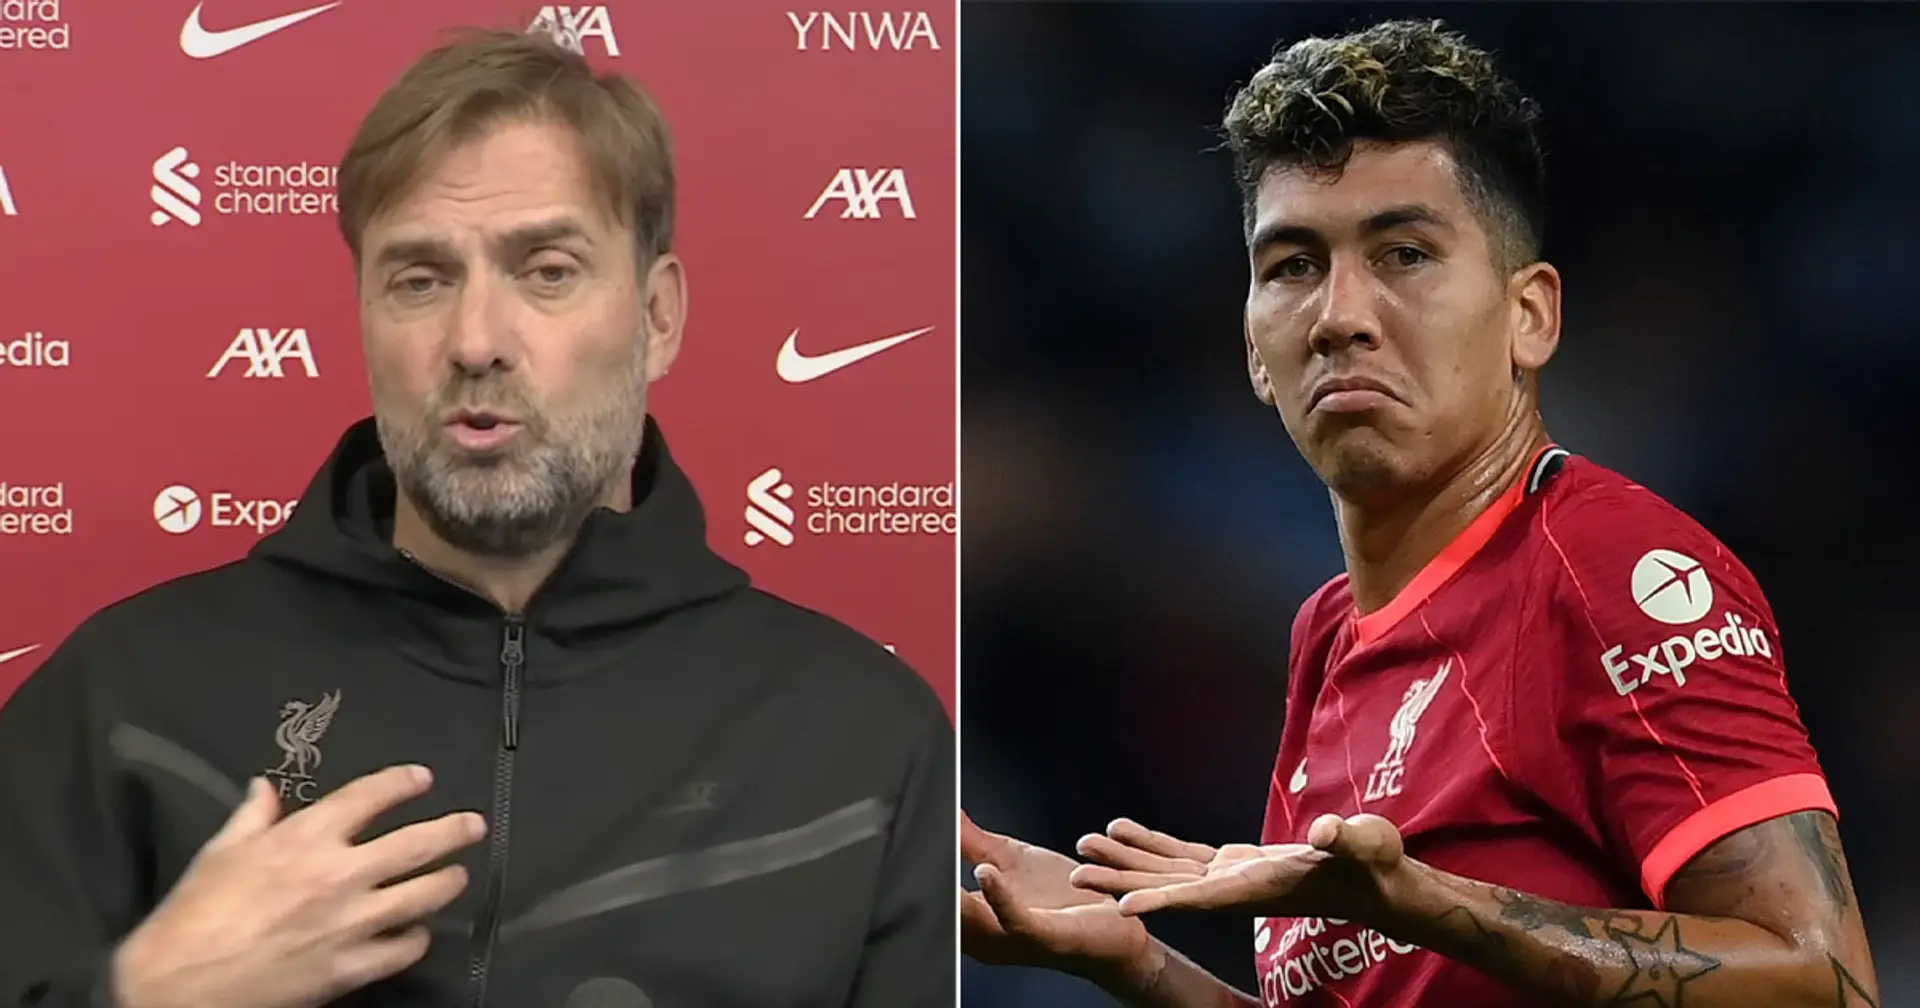 'Best offensive defender I ever saw': Klopp sings praises to Firmino